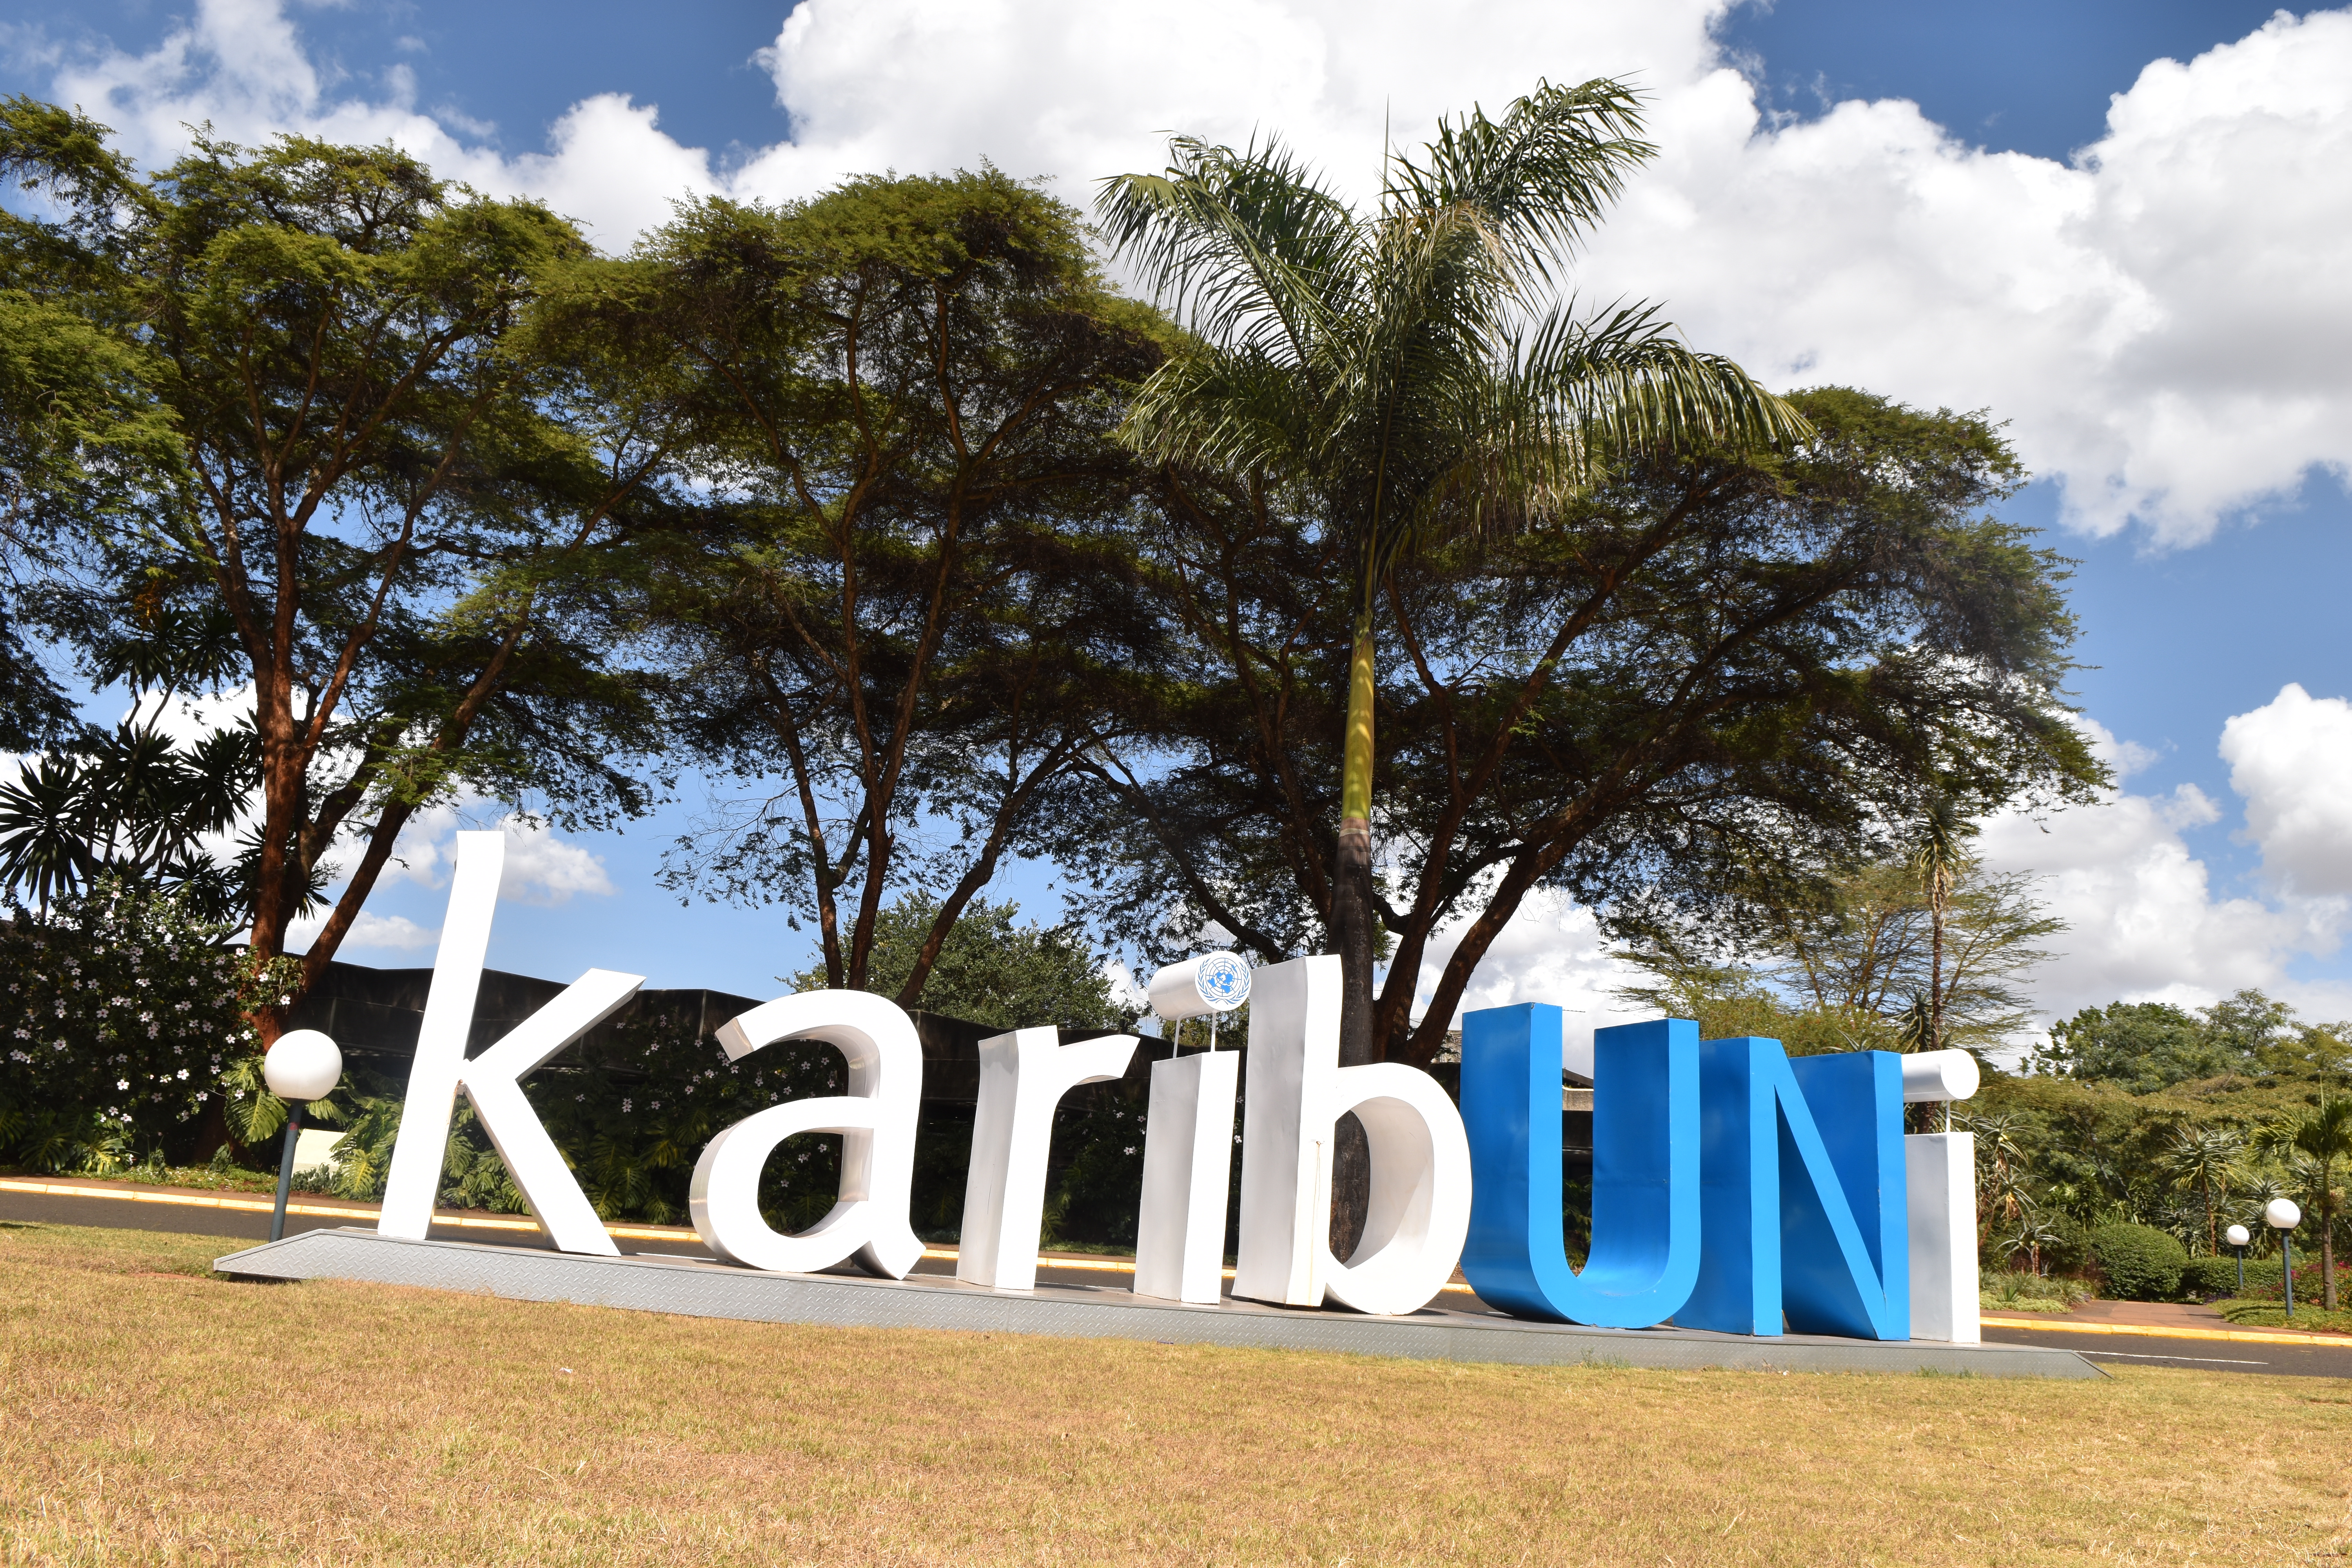 On the ground stands a letter sculpture 'Karibuni!', signifying a warm welcome.